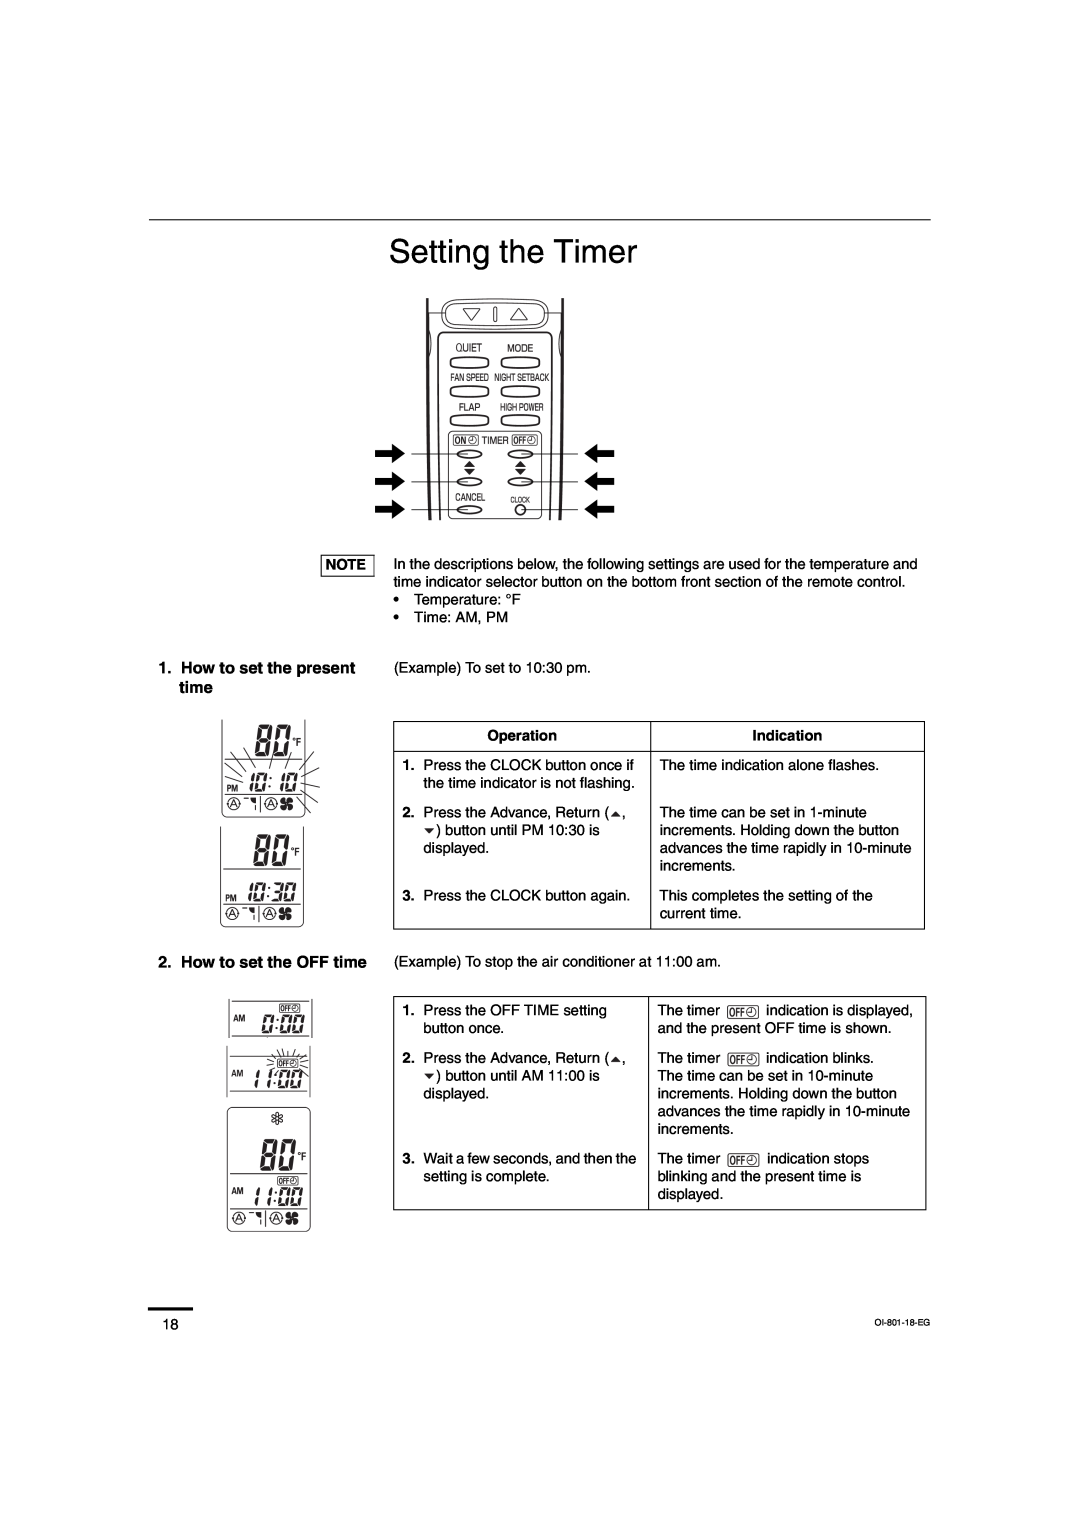 Sanyo CH2472, CH1872 service manual Setting the Timer, How to set the present time 